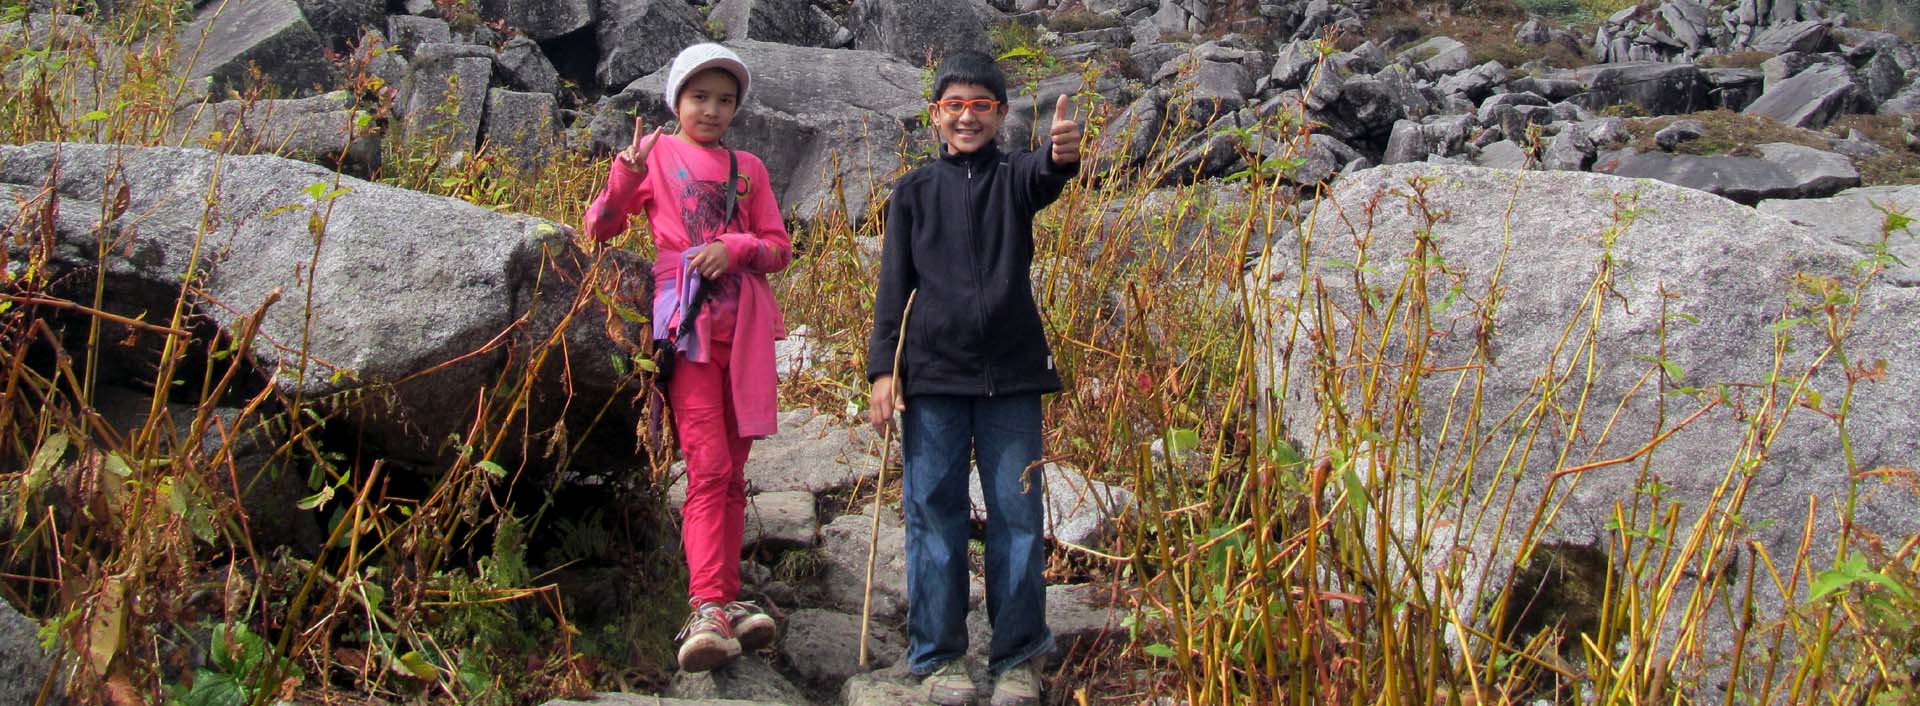 During a day hike in Manali, two children flash thumbs up and a victory sign.